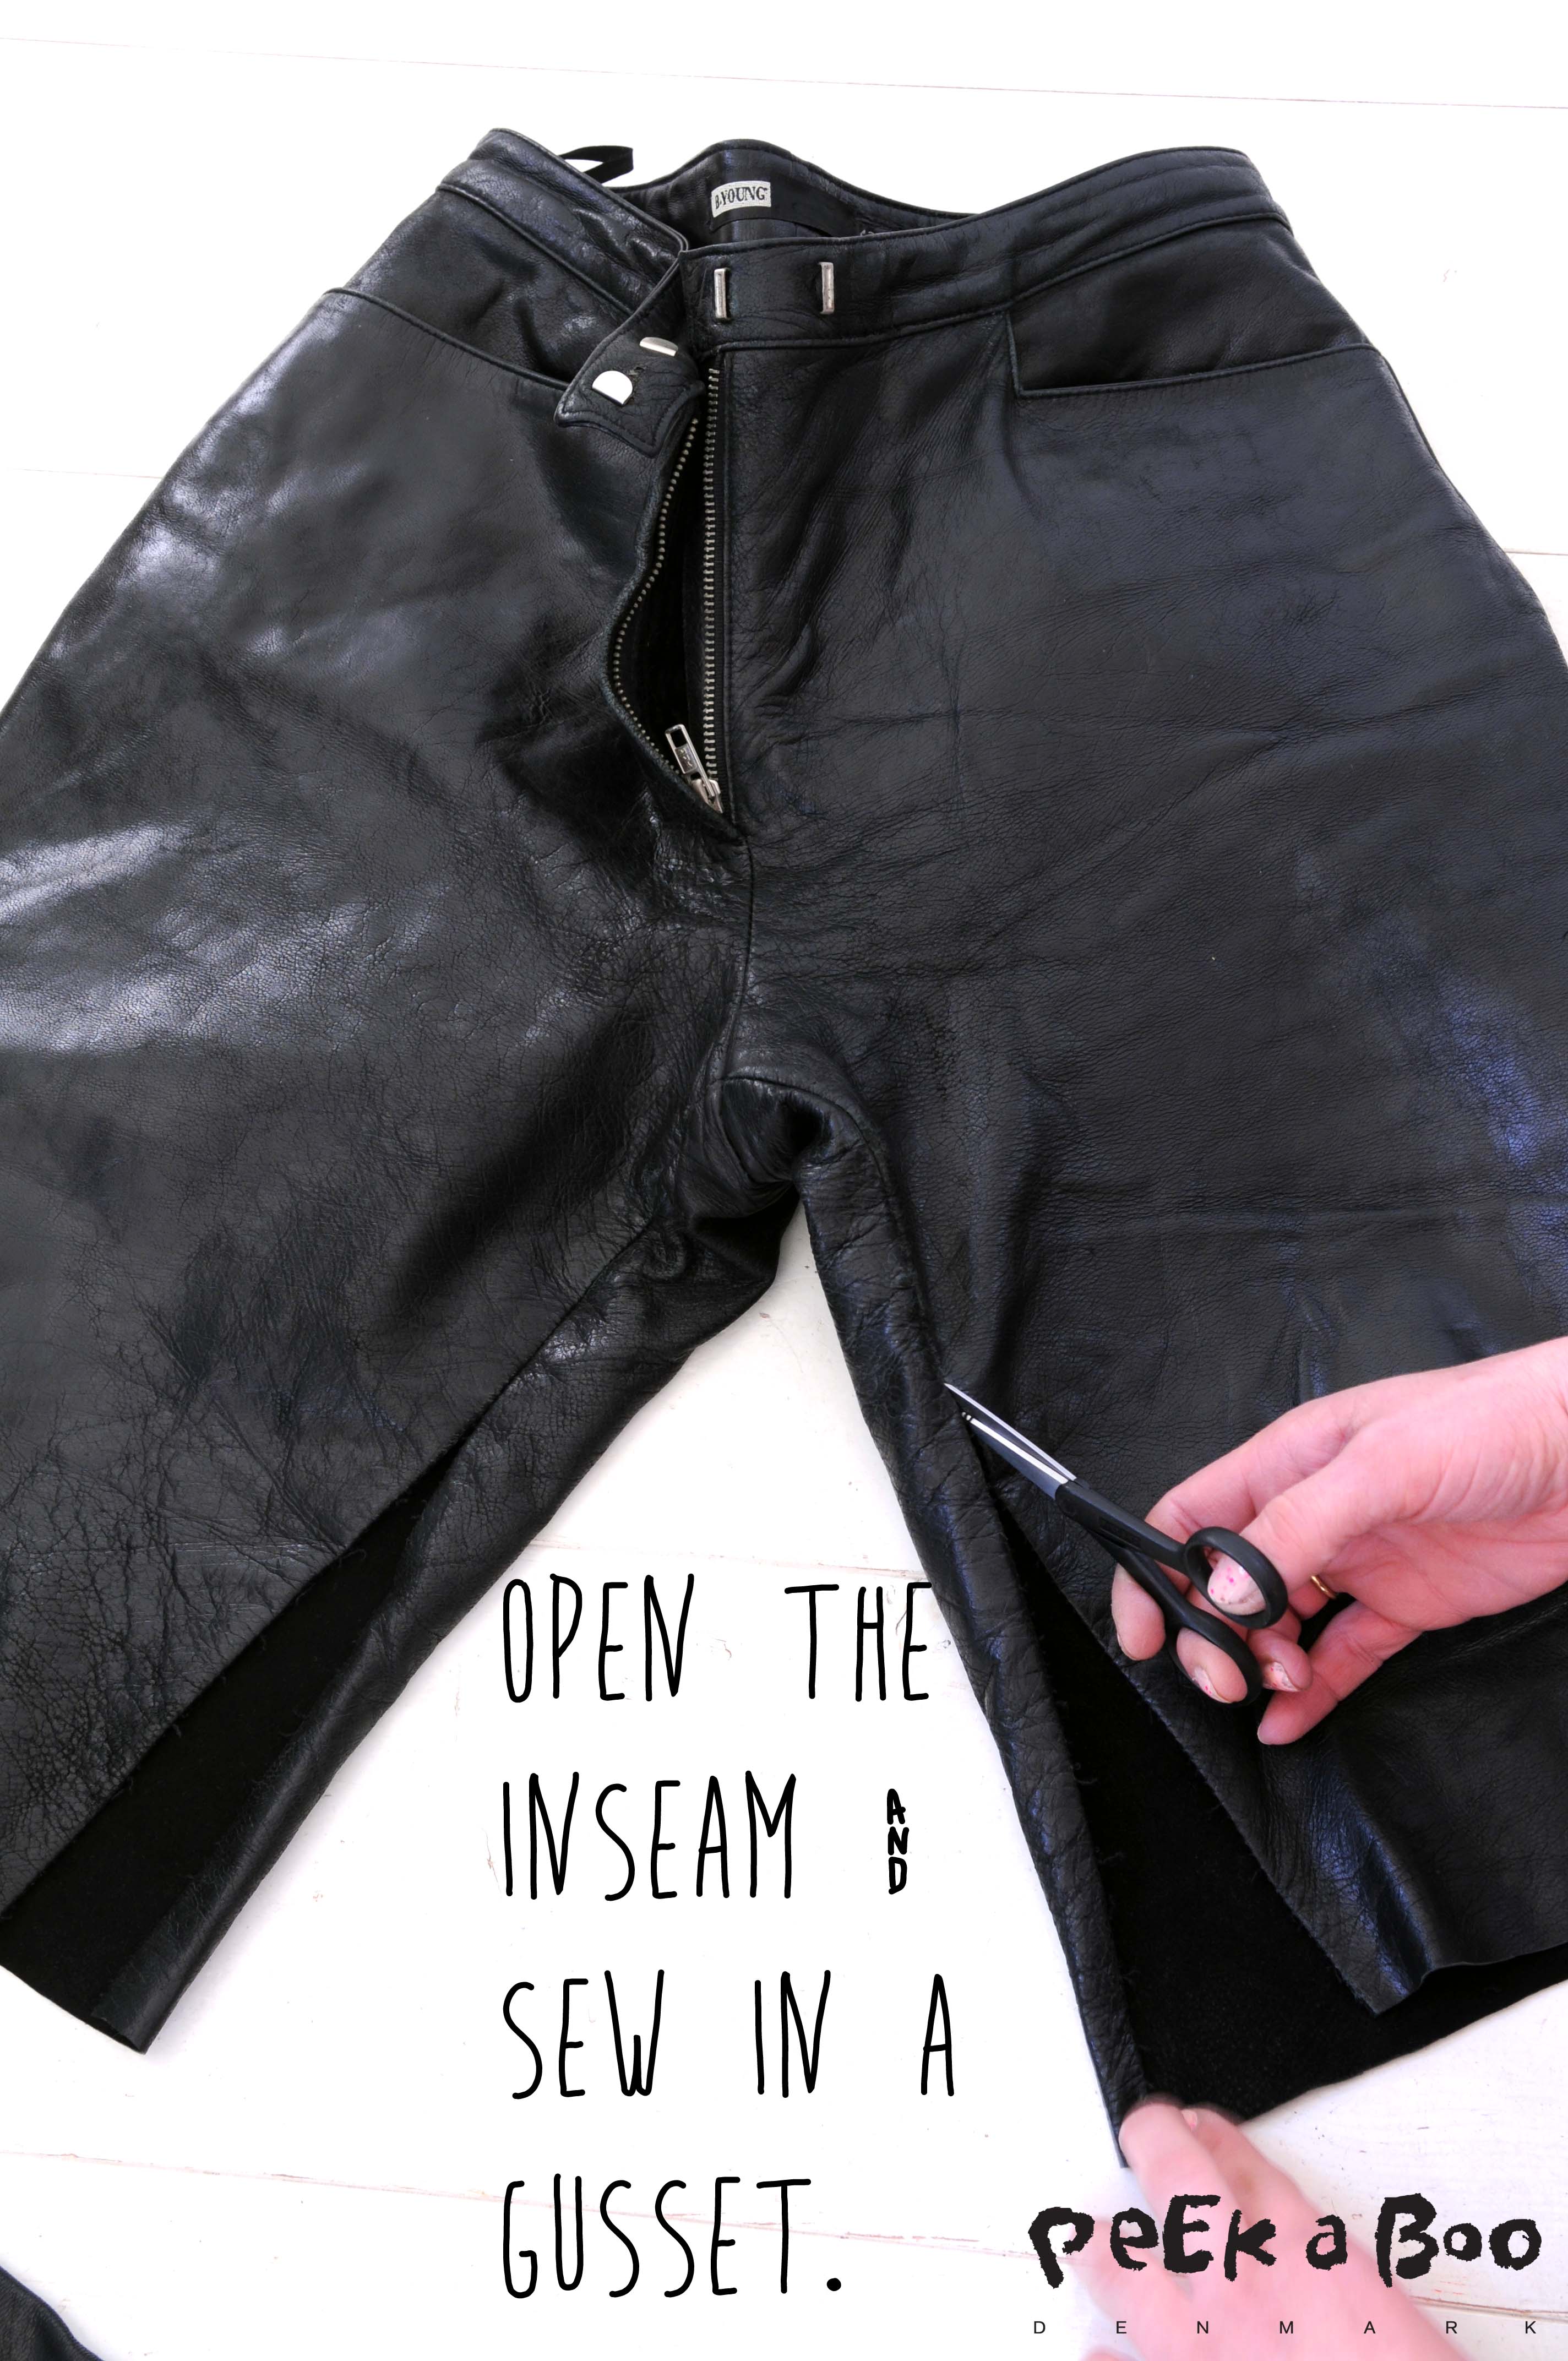 Open the inseam, and make a gusset from the lower leg piece. Sew that in the inseam so you get more straight leg Width. This is just to avoid to many creases by the fold-up.